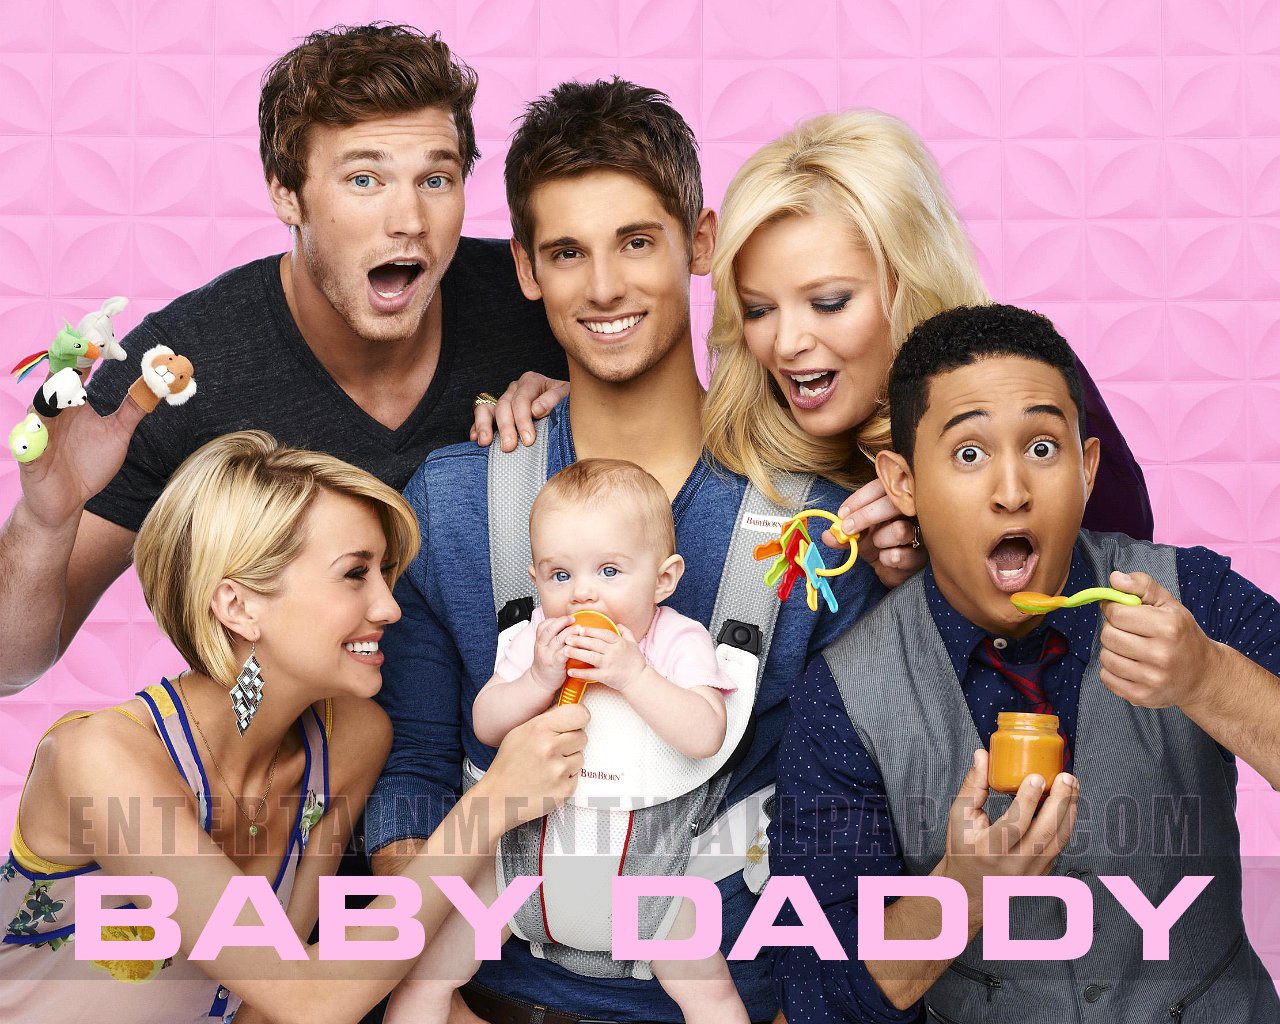 Baby Daddy Backgrounds, Compatible - PC, Mobile, Gadgets| 1280x1024 px